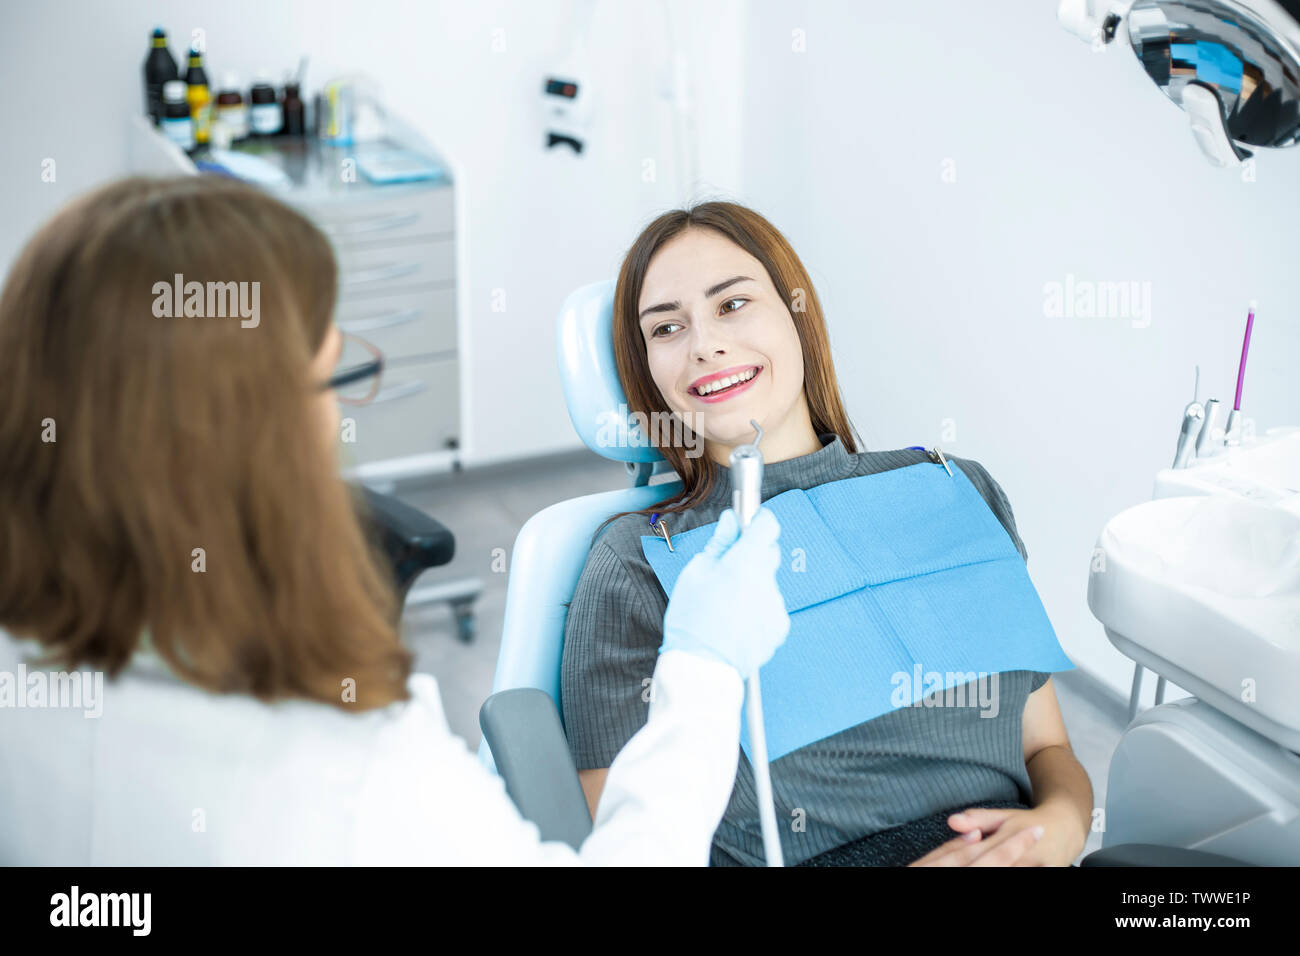 Smiling girl treats teeth while sitting in the dental chair at the doctor. Stock Photo